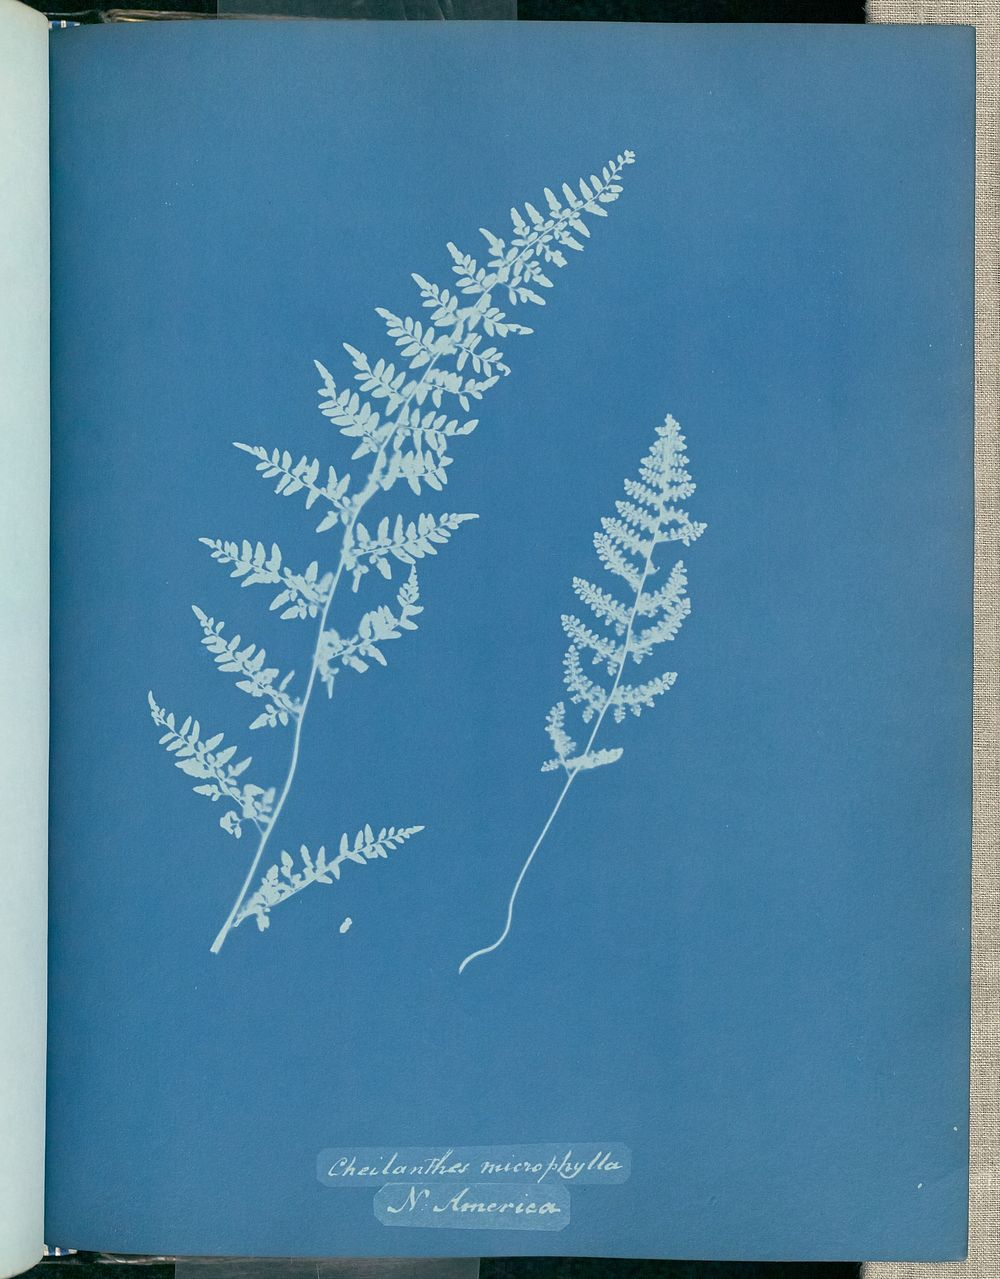 Cheilanthes microphylla, N. America by Anna Atkins and Anne Dixon